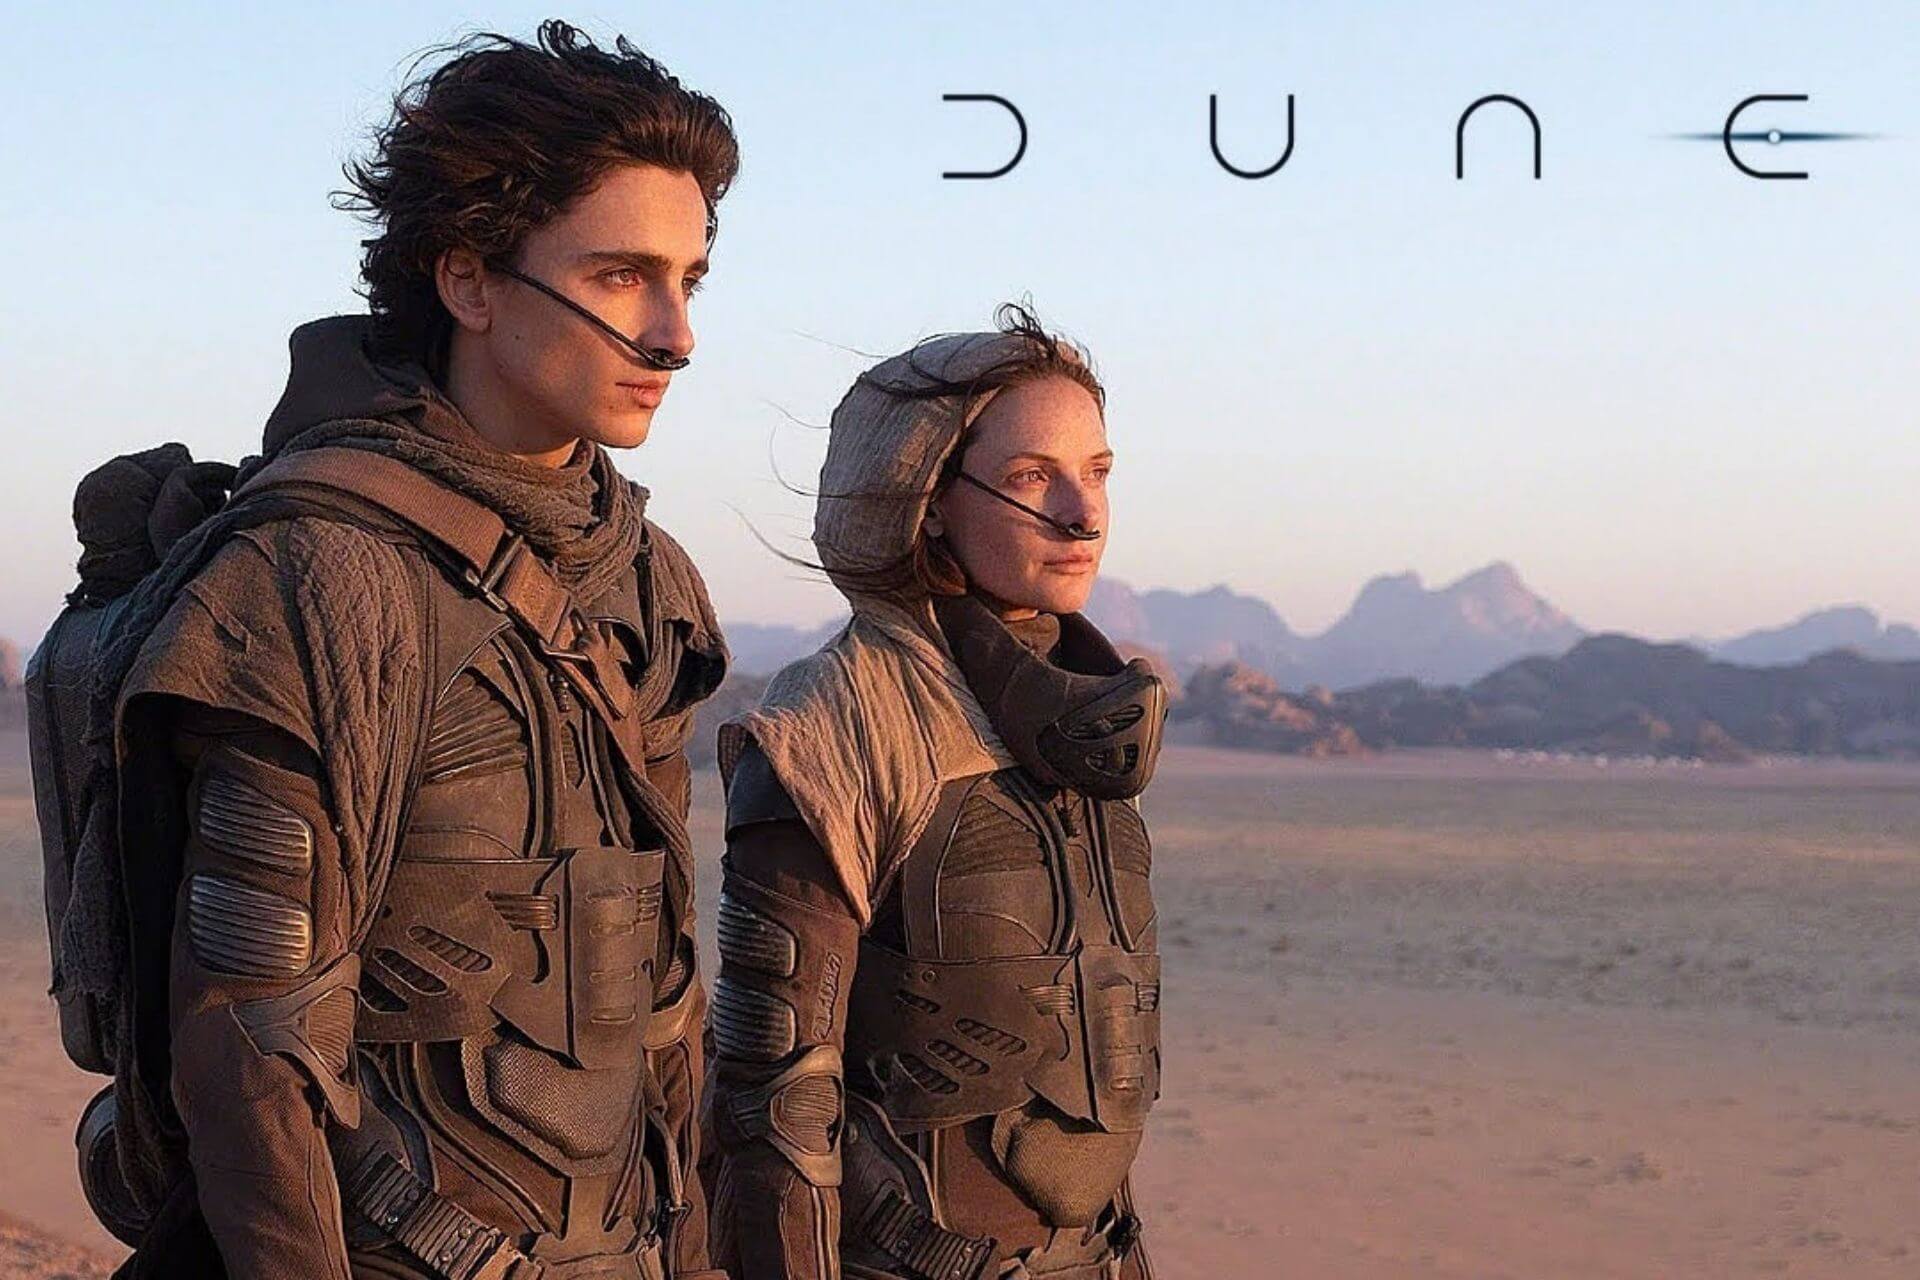 Trailer Thursday: The first trailer for 'Dune' is out and it is epic